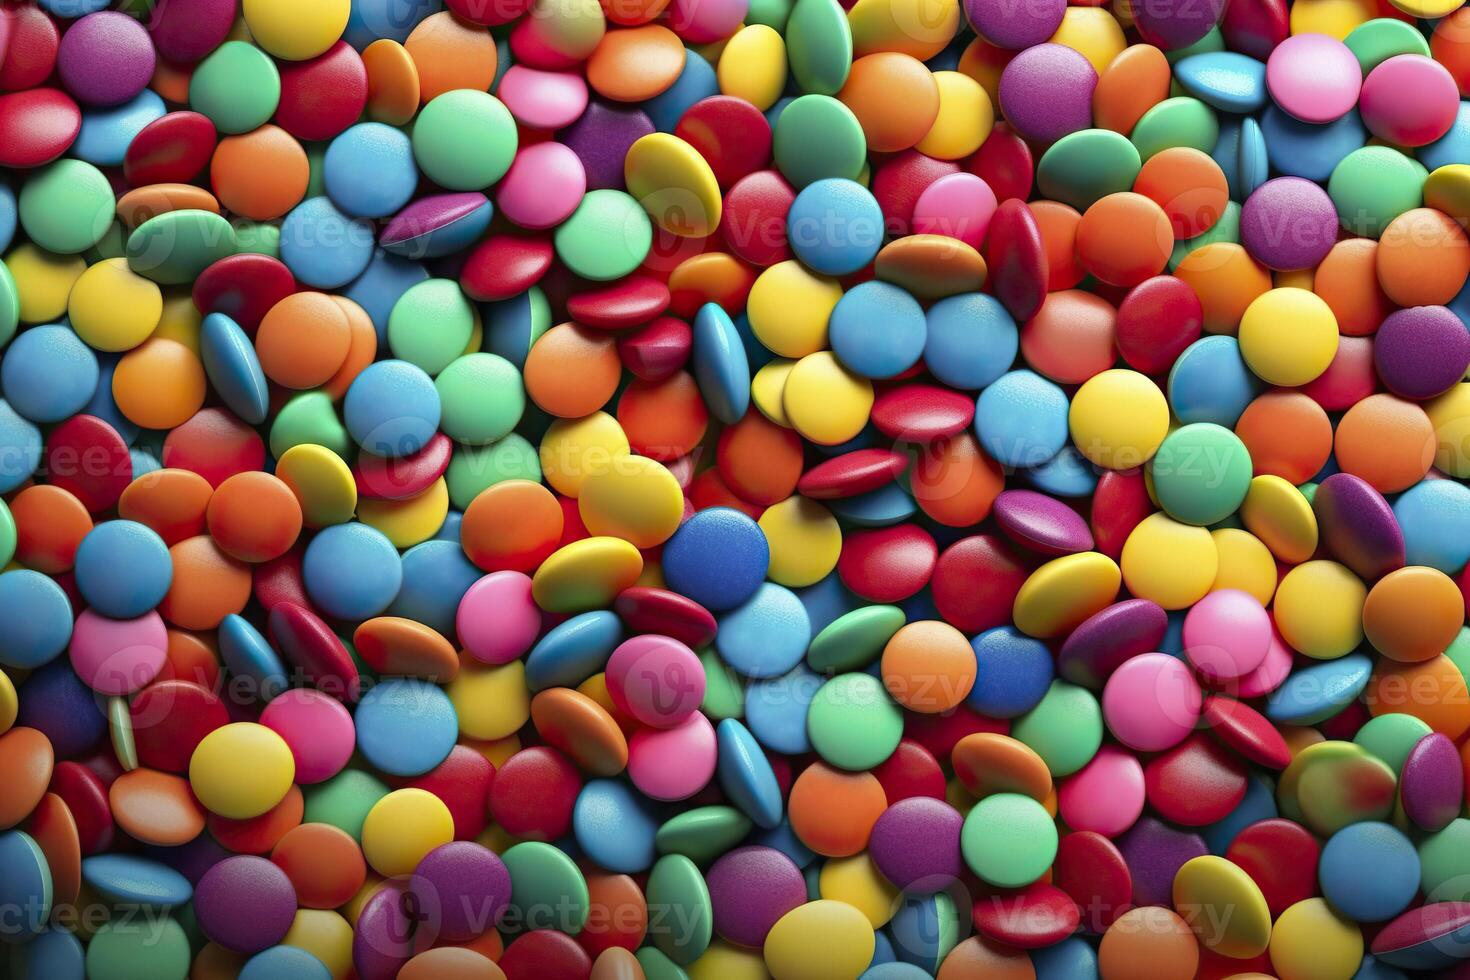 Background of colorful candies. . photo